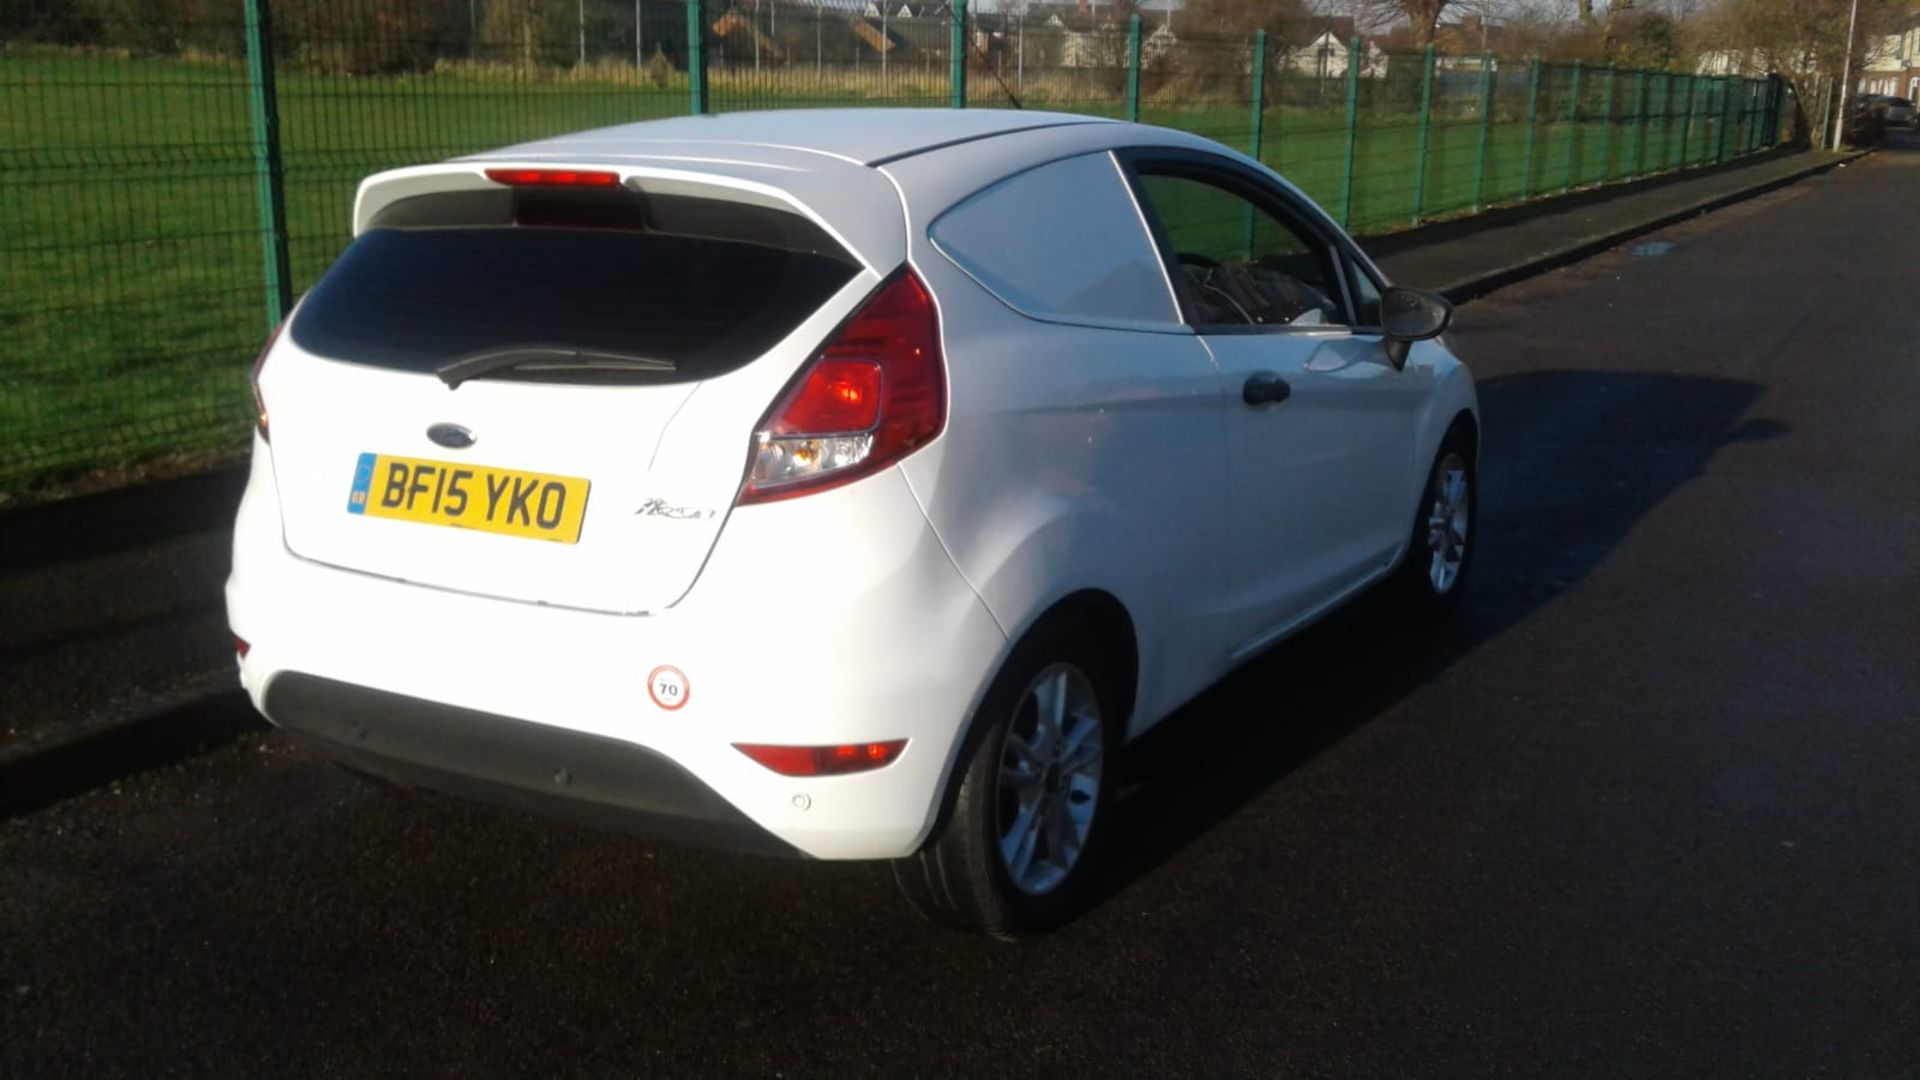 2015/15 REG FORD FIESTA ECONETIC TECH TDCI 1.6 CAR DERIVED VAN, SHOWING 0 FORMER KEEPERS *NO VAT* - Image 6 of 12